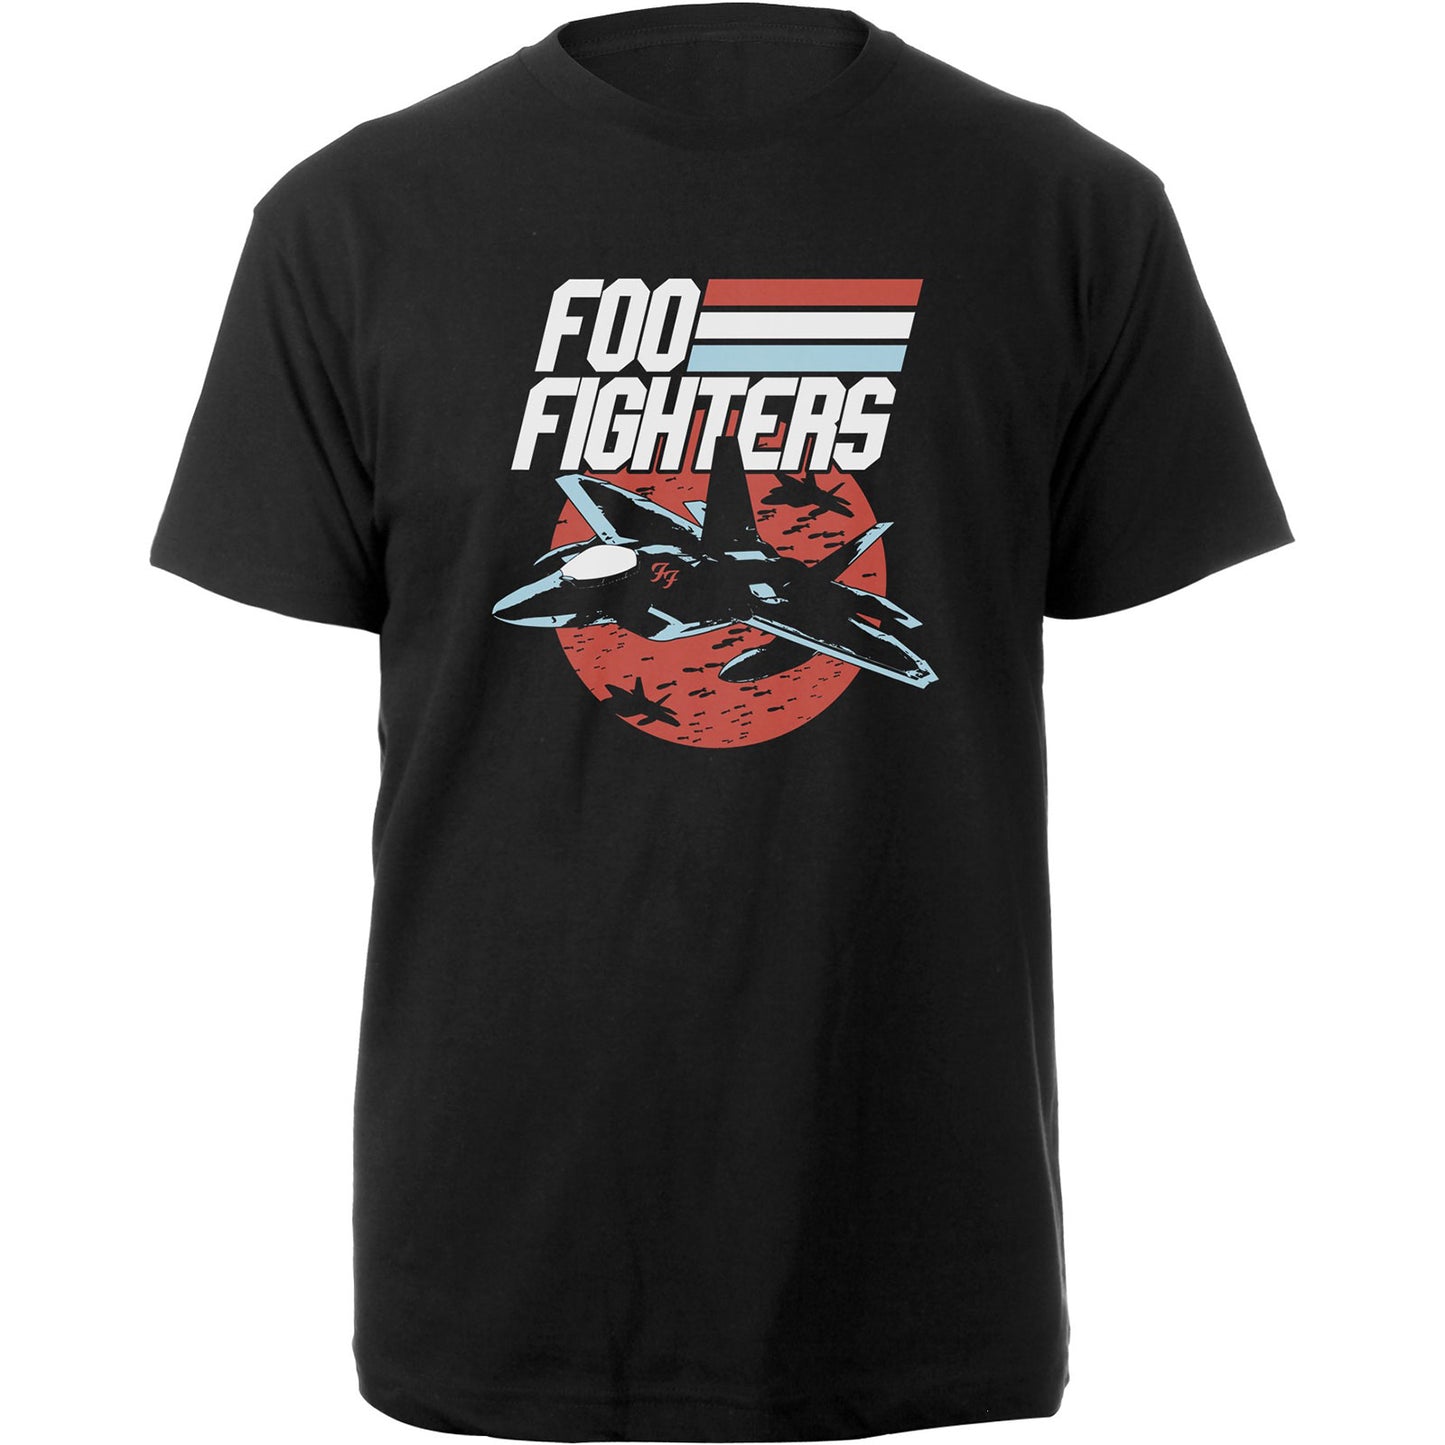 Foo Fighters T-Shirt: Jets